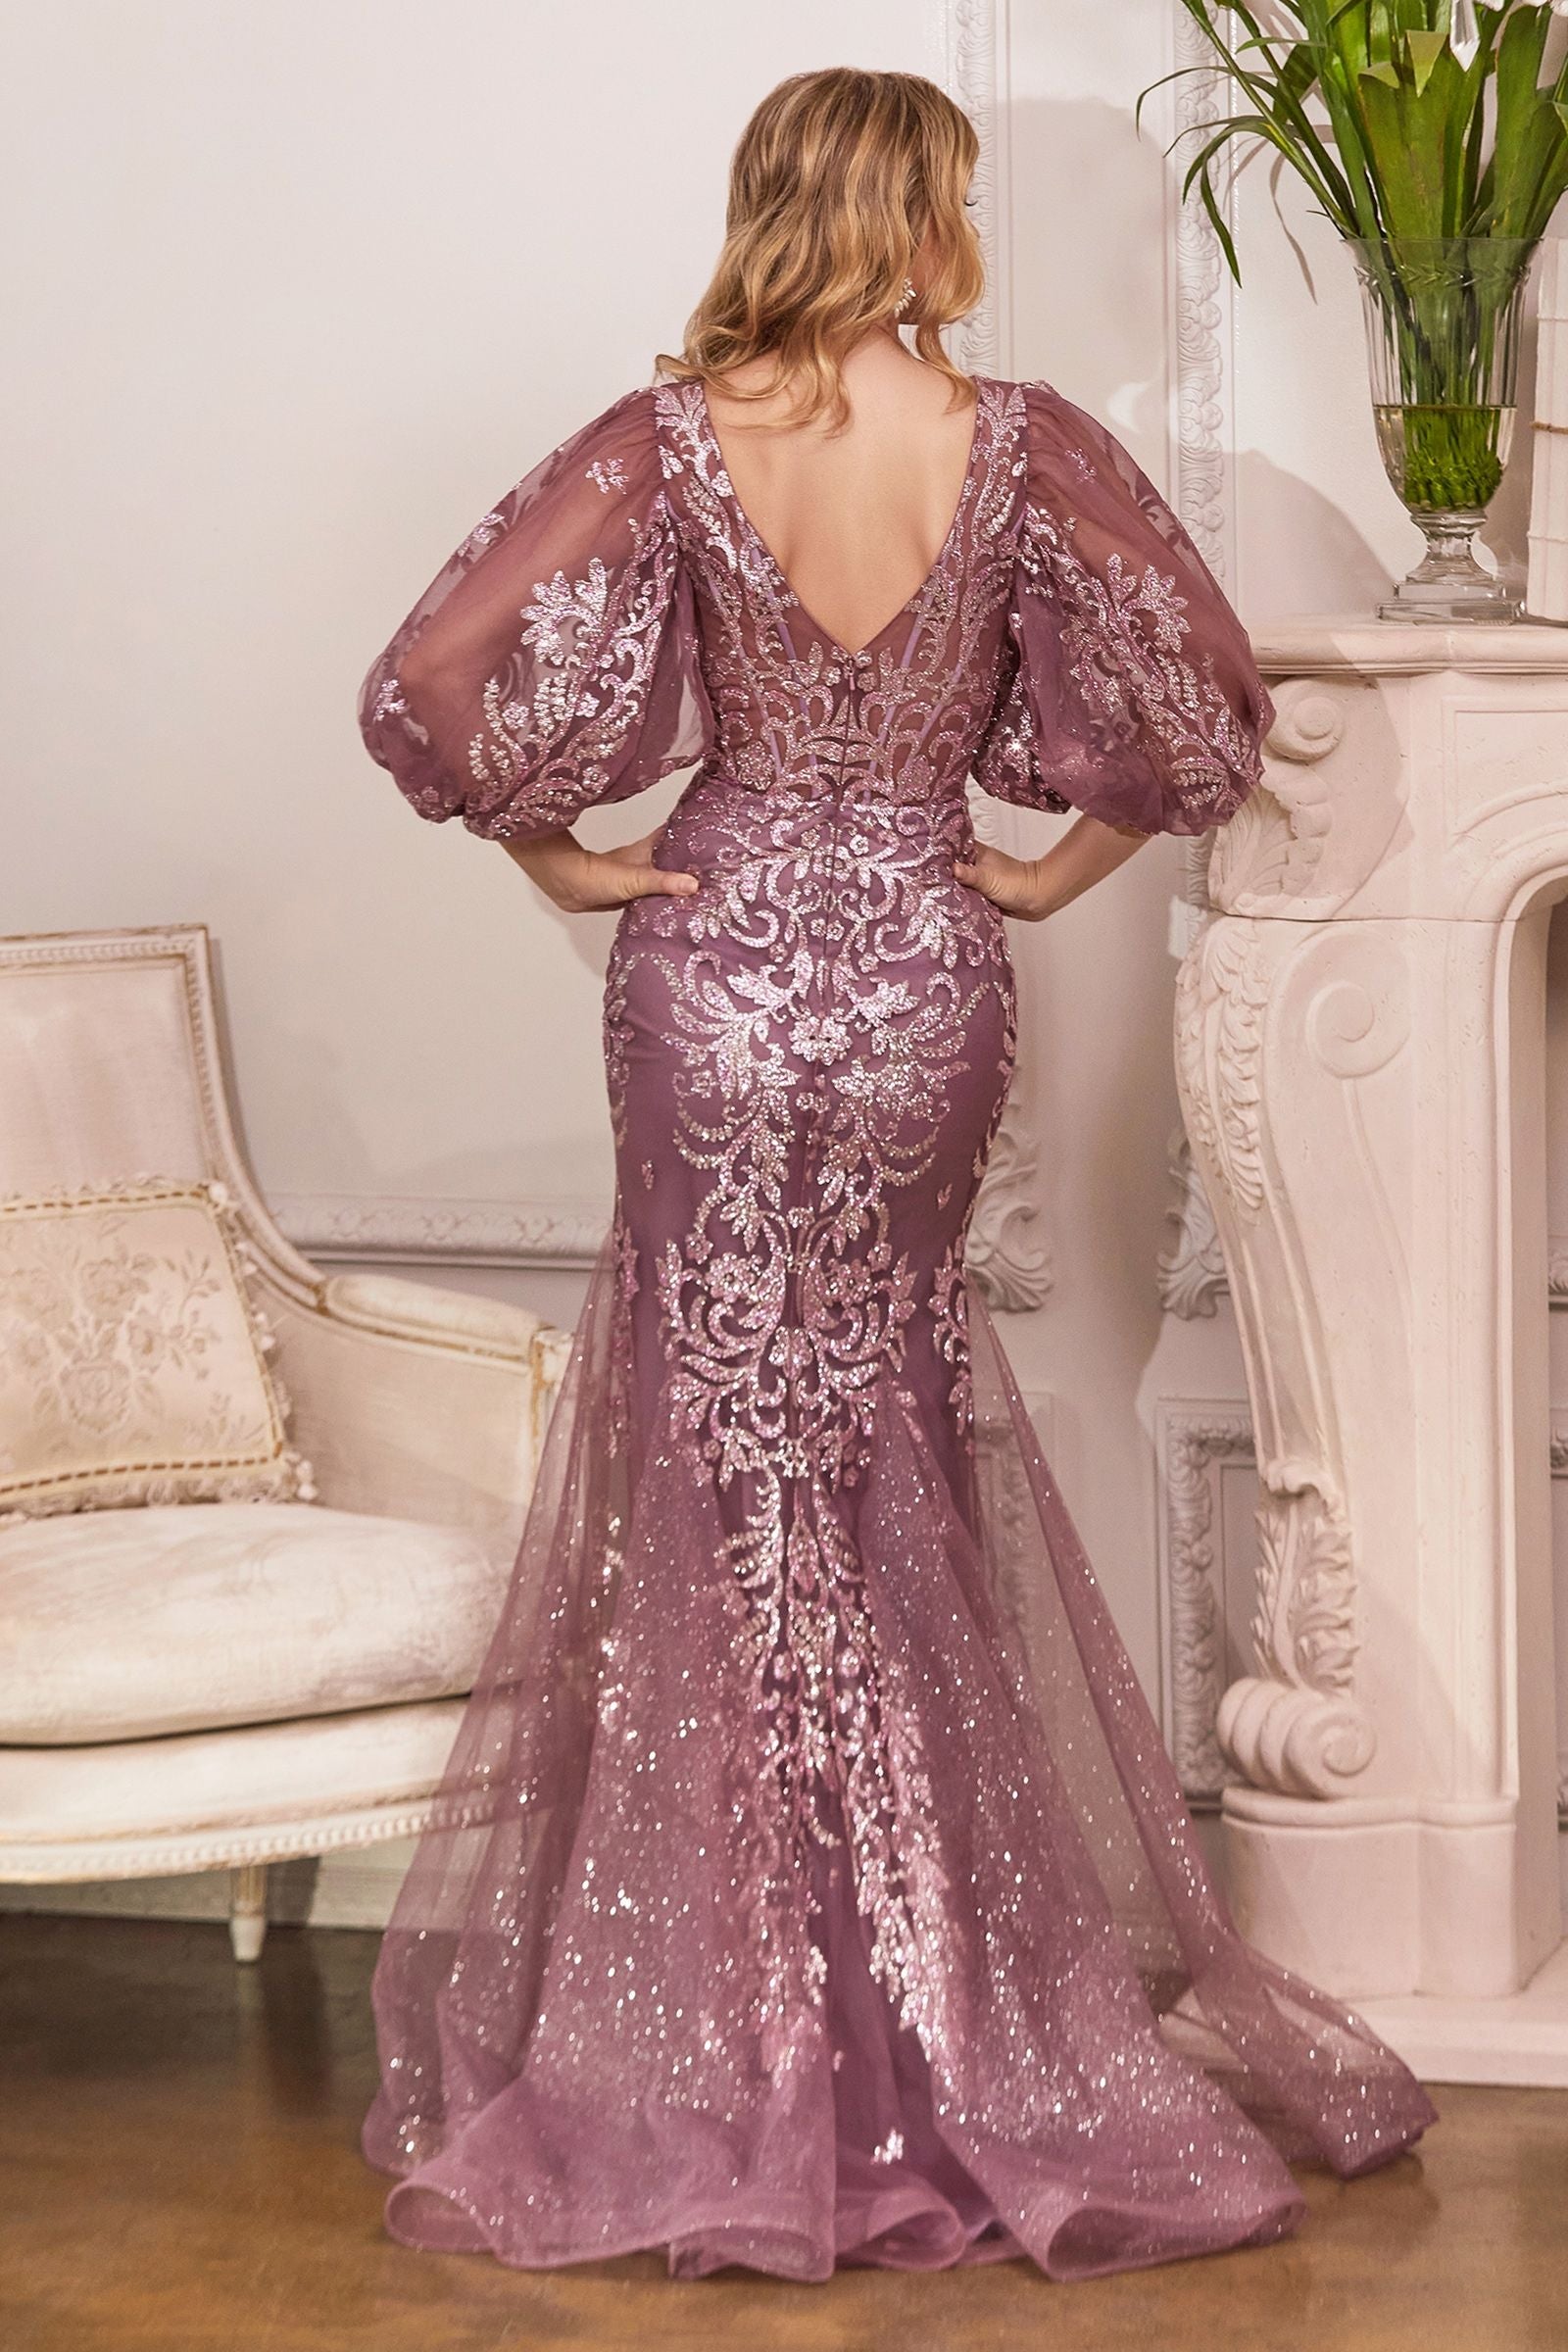 A mesmerizing mermaid gown with long sleeves, covered in radiant glitter